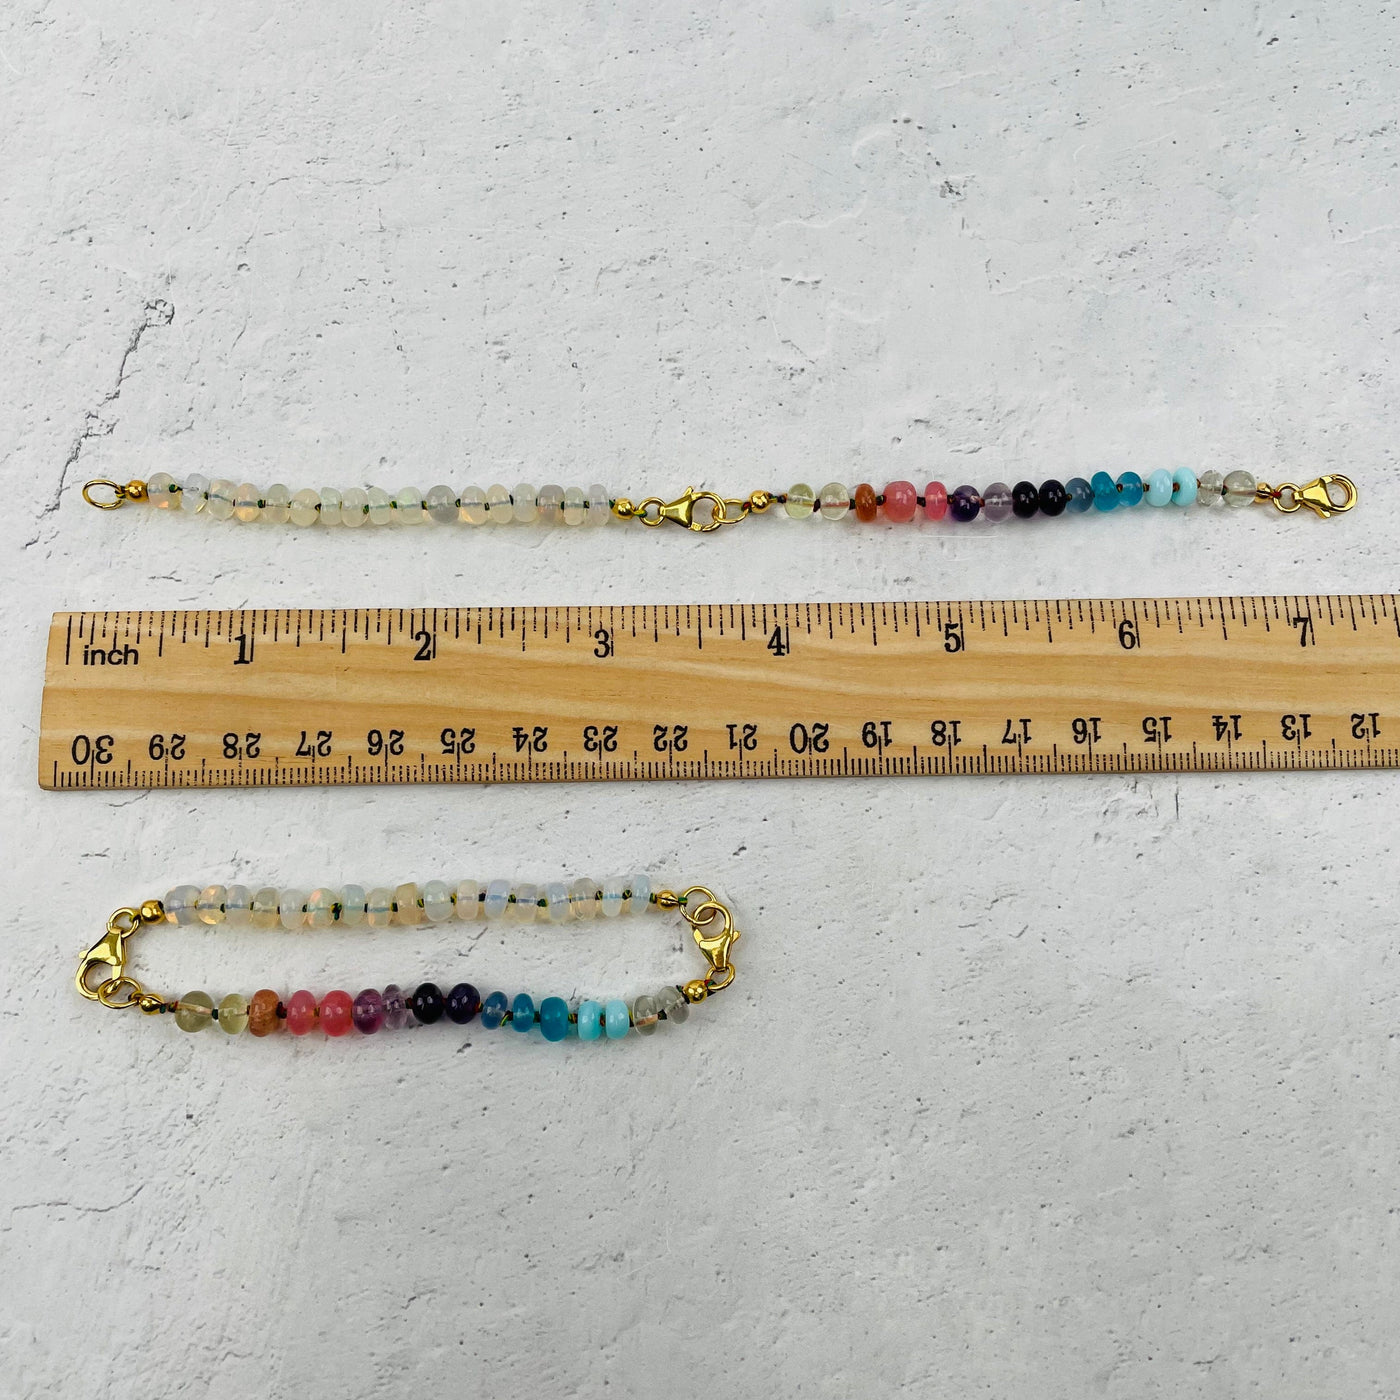 Bracelet and Necklace Extender next to a ruler for size reference 